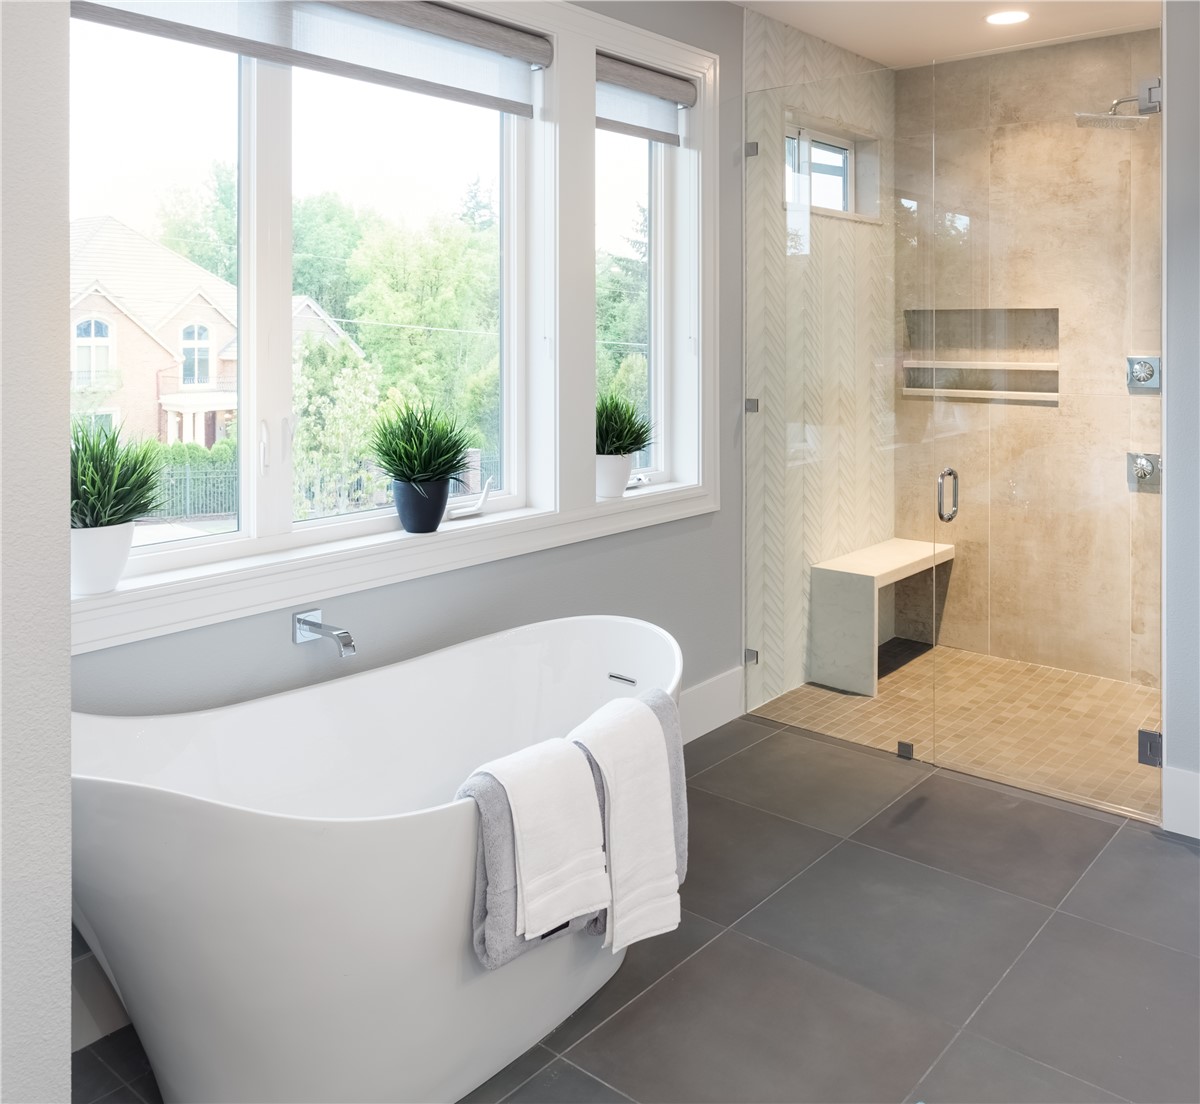 Shower and Bathtub Solutions to Consider for Multi-Family Residences